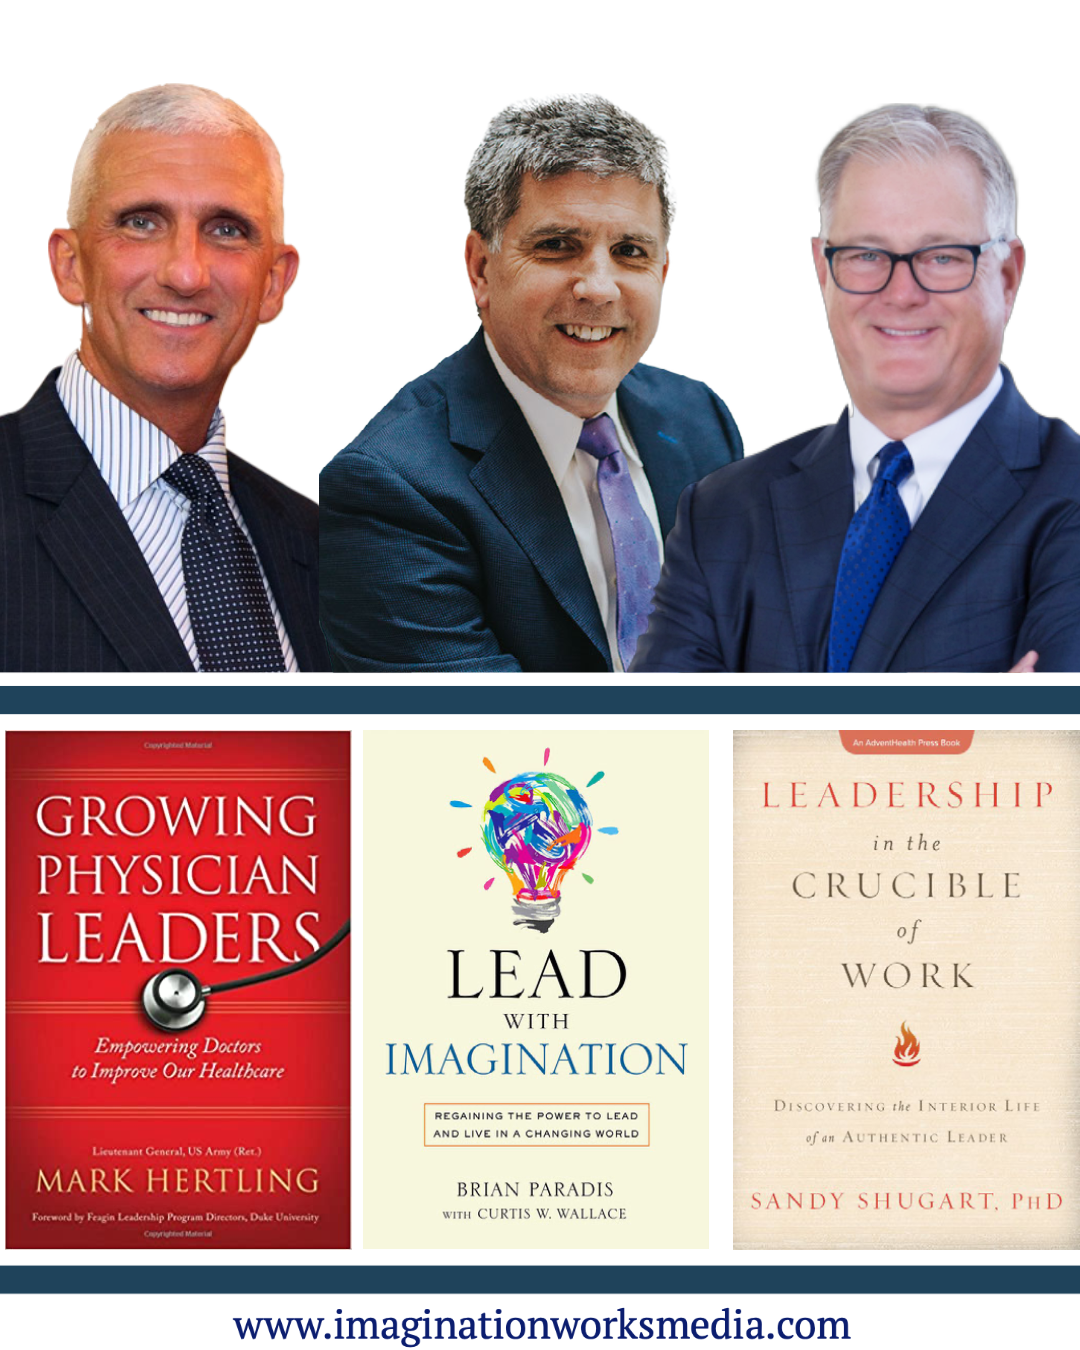 Growing Physician Leaders: Empowering Doctors to Improve Our Healthcare 1st Edition